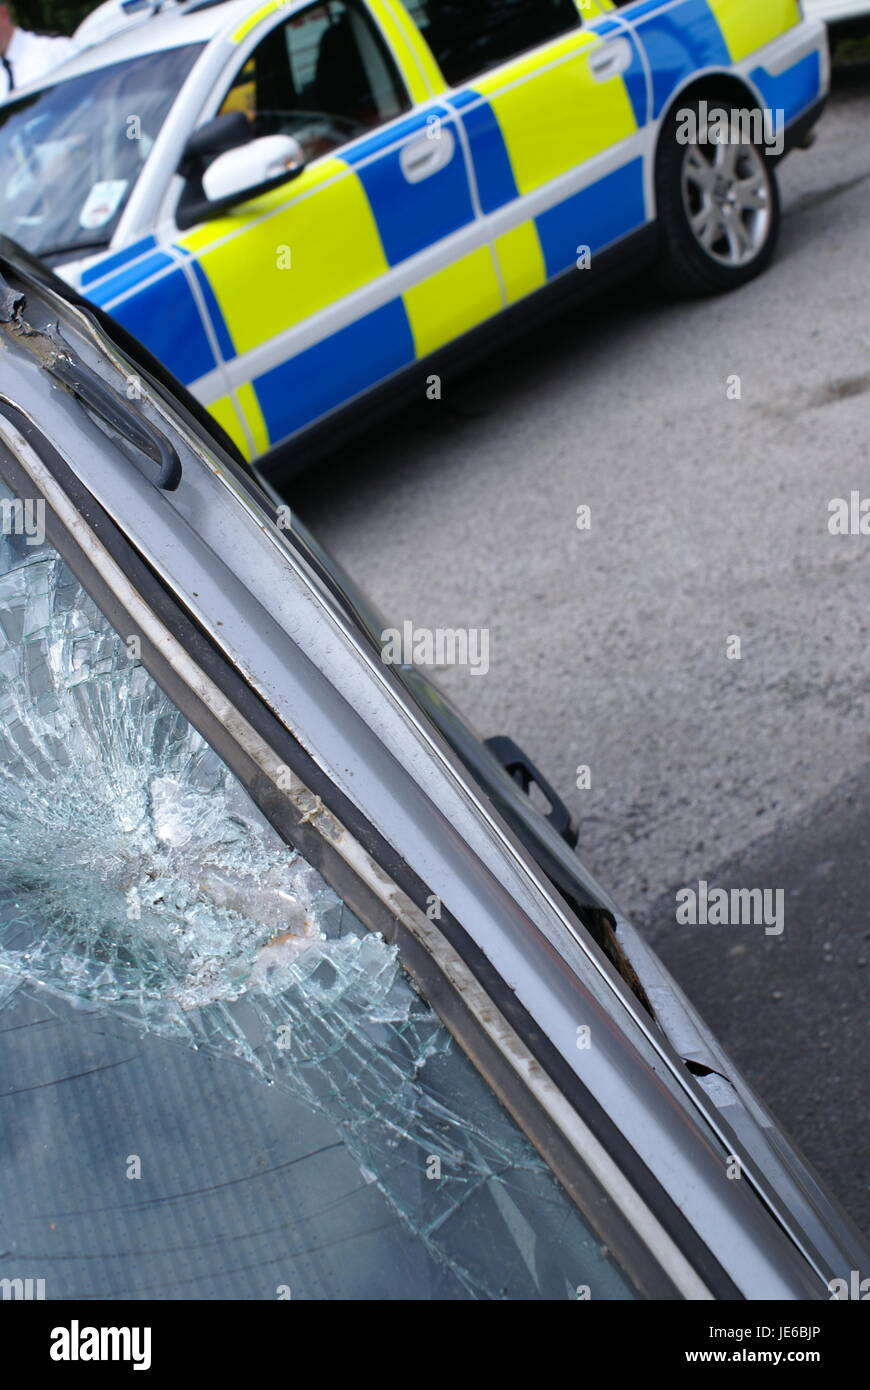 police dealing with terrorist incident Stock Photo